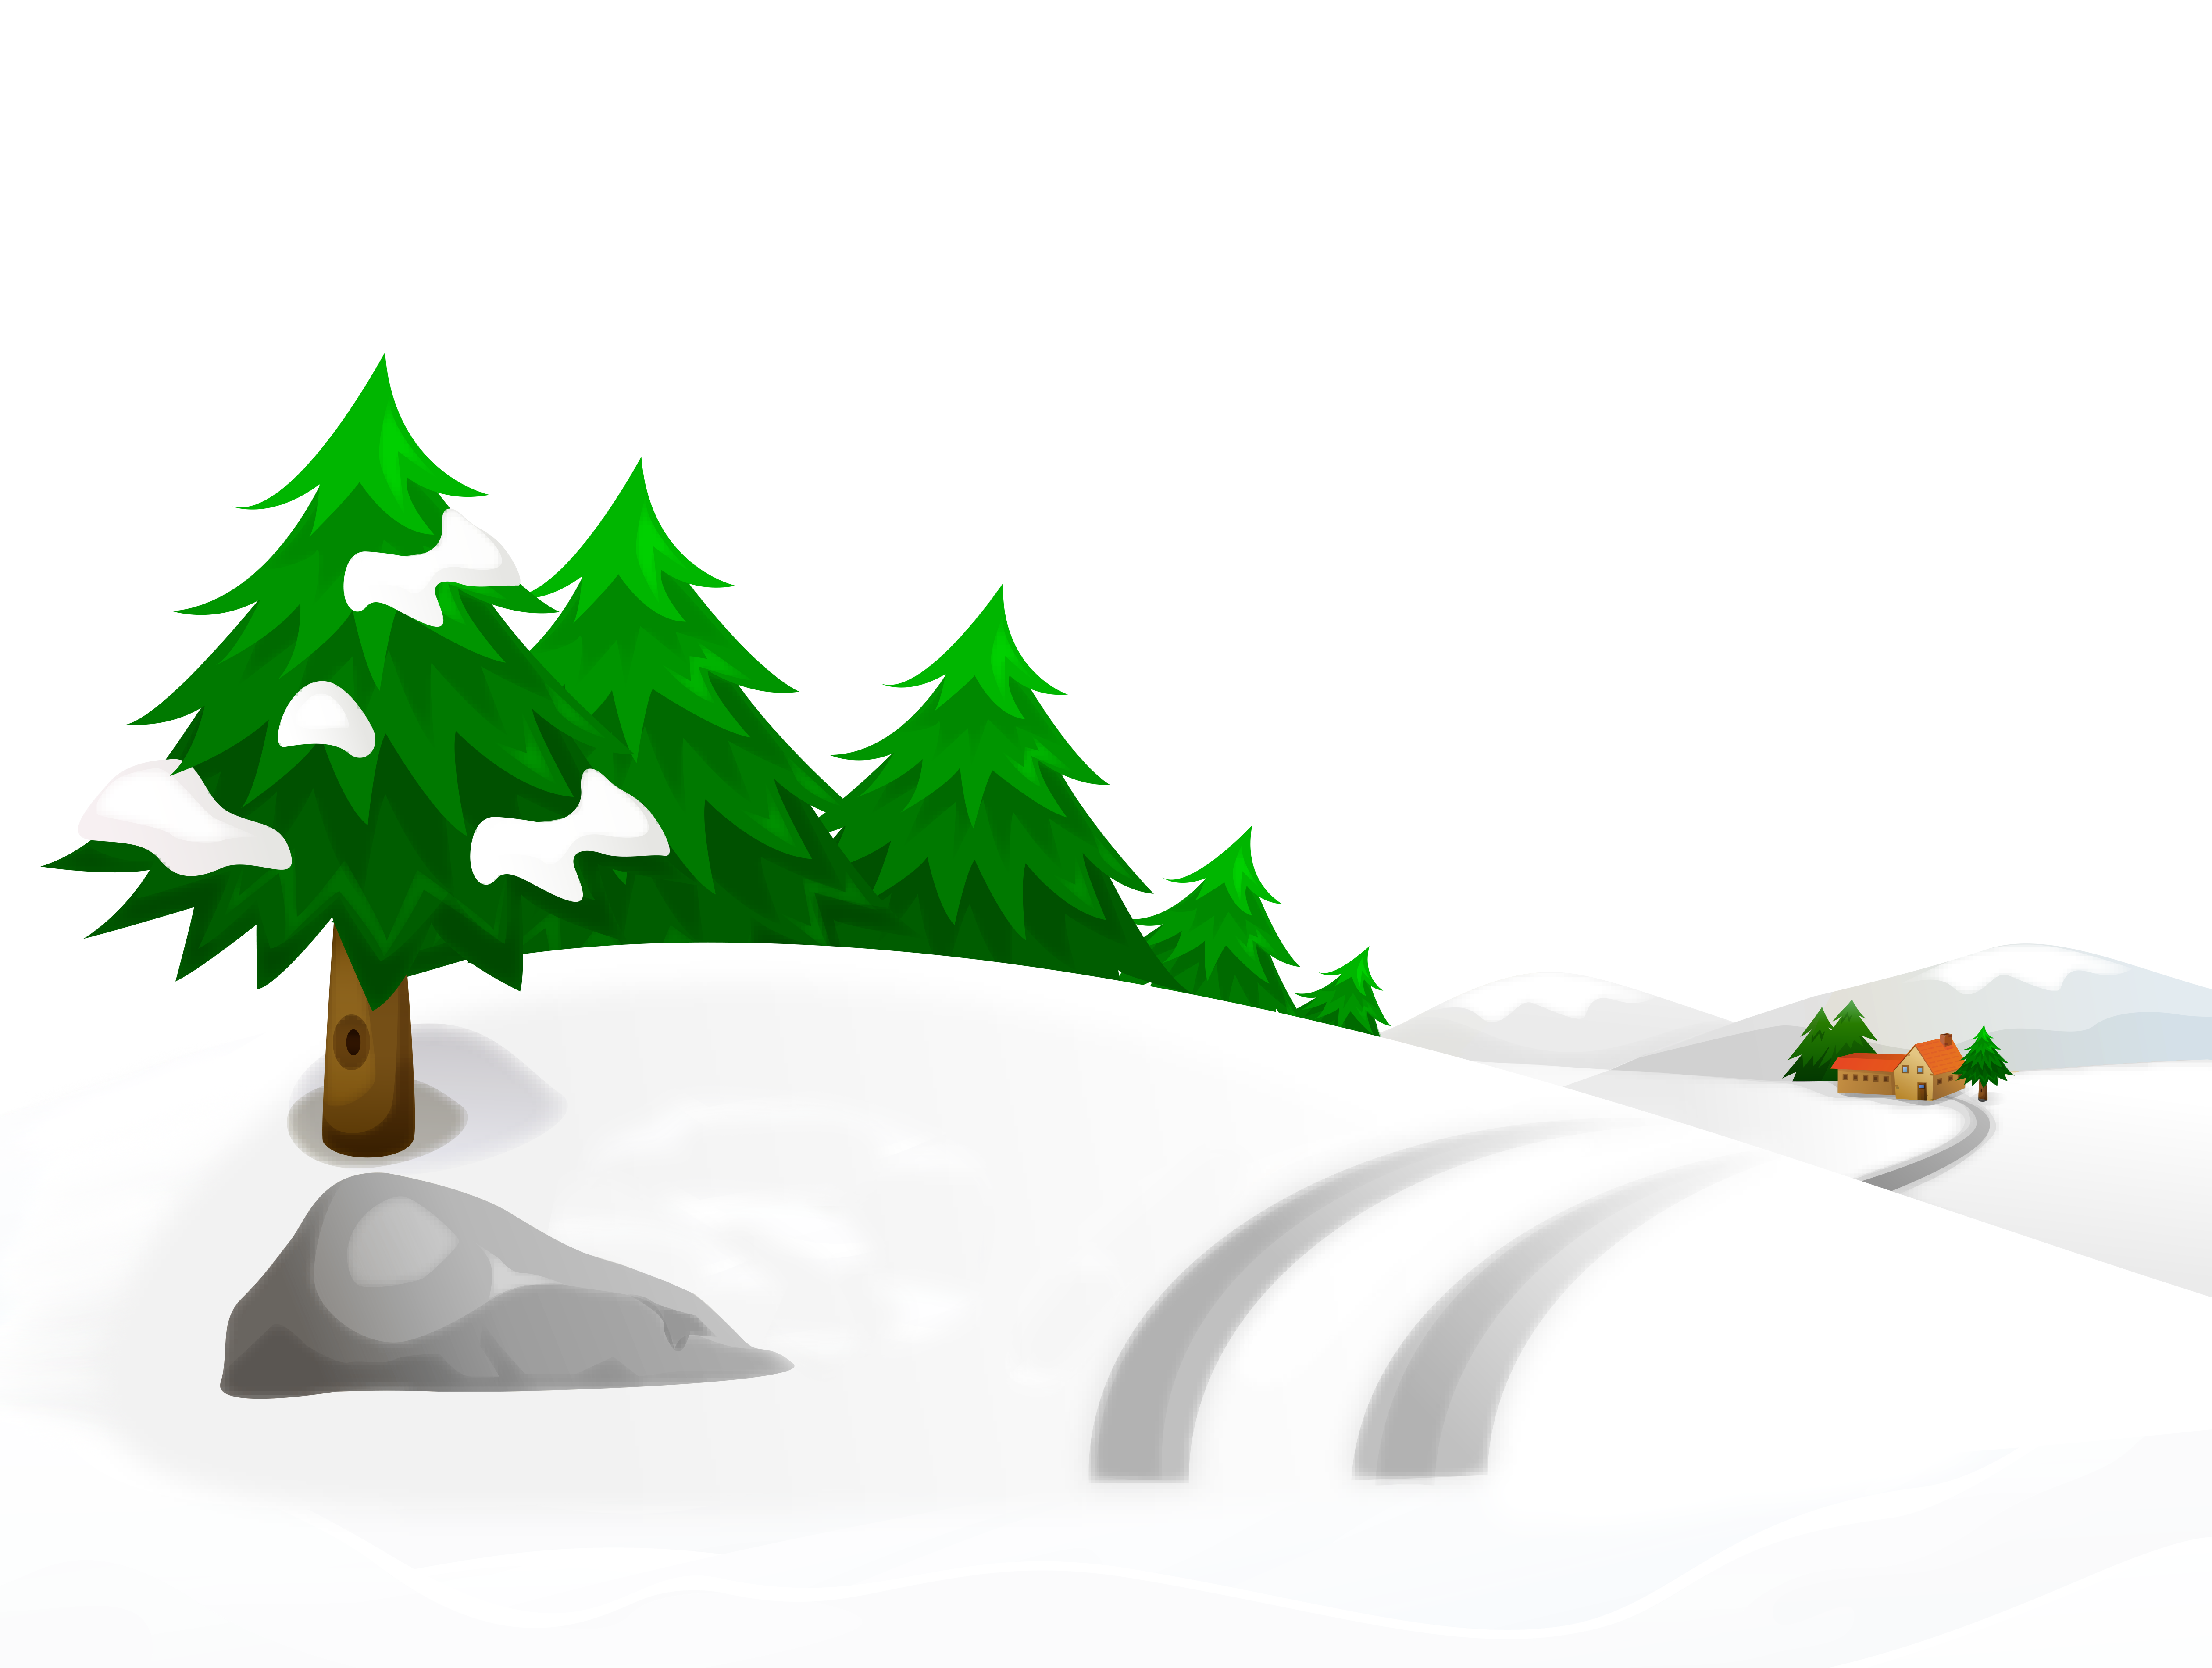 Winter clipart plant. Snowy ground with trees